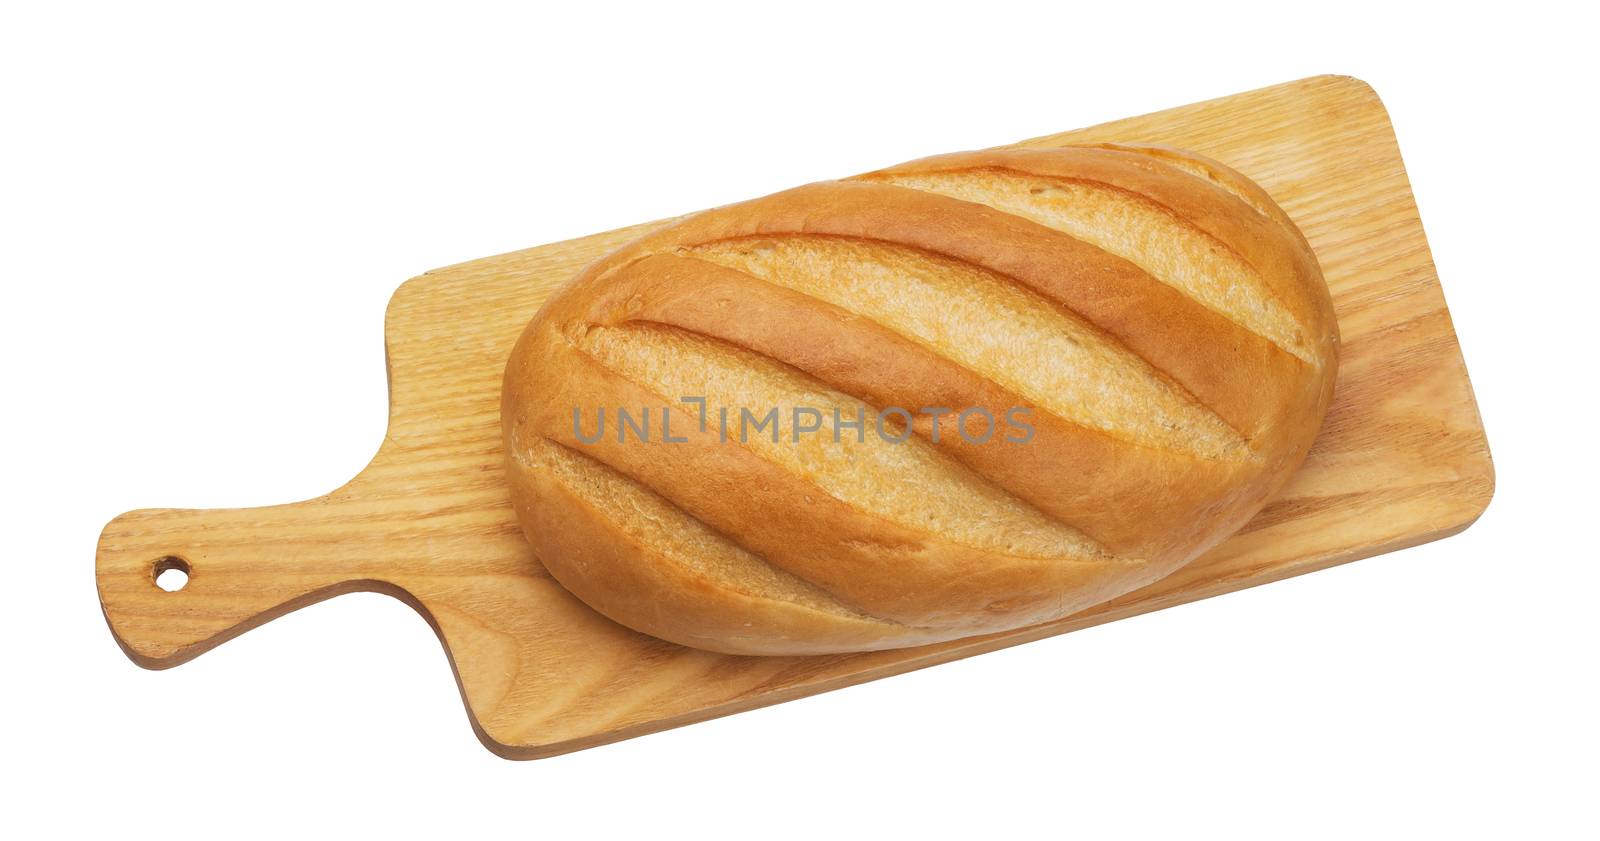 Long loaf on wooden cutting board isolated on white background, top view by xamtiw